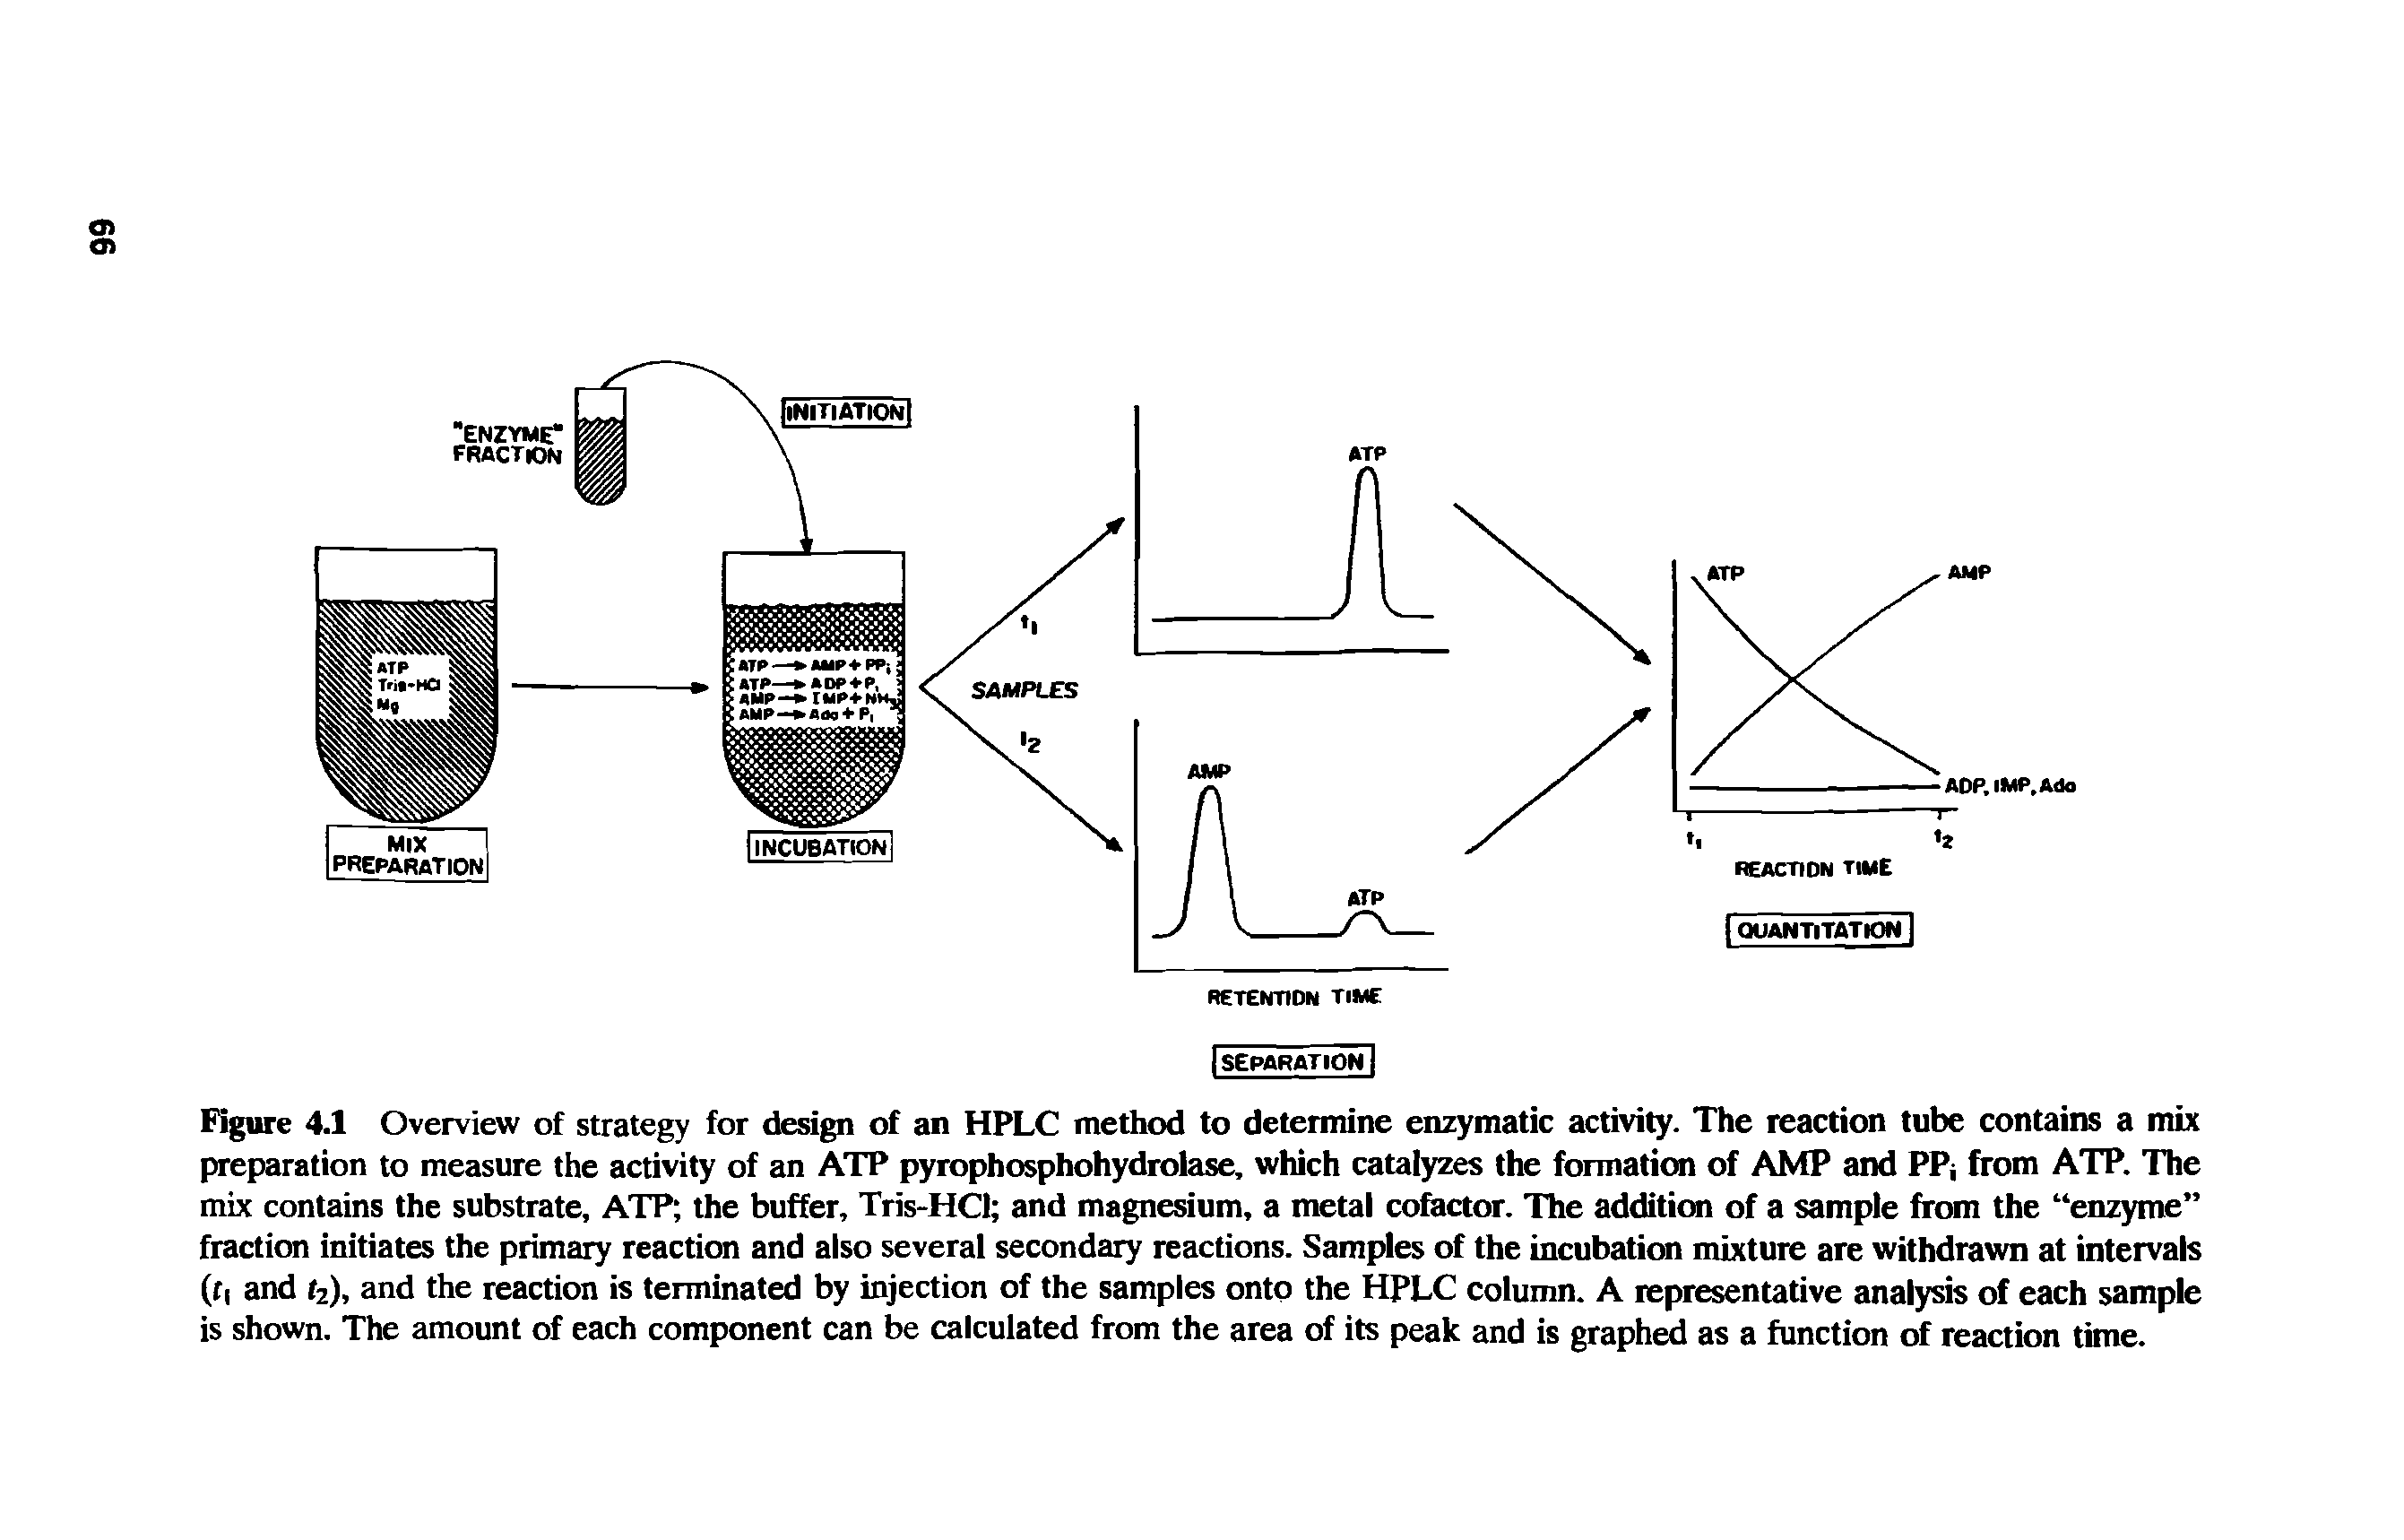 Figure 4.1 Overview of strategy for design of an HPLC method to determine enzymatic activity. The reaction tube contains a mix preparation to measure the activity of an ATP pyrophosphohydrolase, which catalyzes the formation of AMP and PPj from ATP. The mix contains the substrate, ATP the buffer, Tris-HCl and magnesium, a metal cofactor. The addition of a sample from the enzyme fraction initiates the primary reaction and also several secondary reactions. Samples of the incubation mixture are withdrawn at intervals (r( and r2), and the reaction is terminated by injection of the samples onto the HPLC column. A representative analysis of each sample is shown. The amount of each component can be calculated from the area of its peak and is graphed as a function of reaction time.